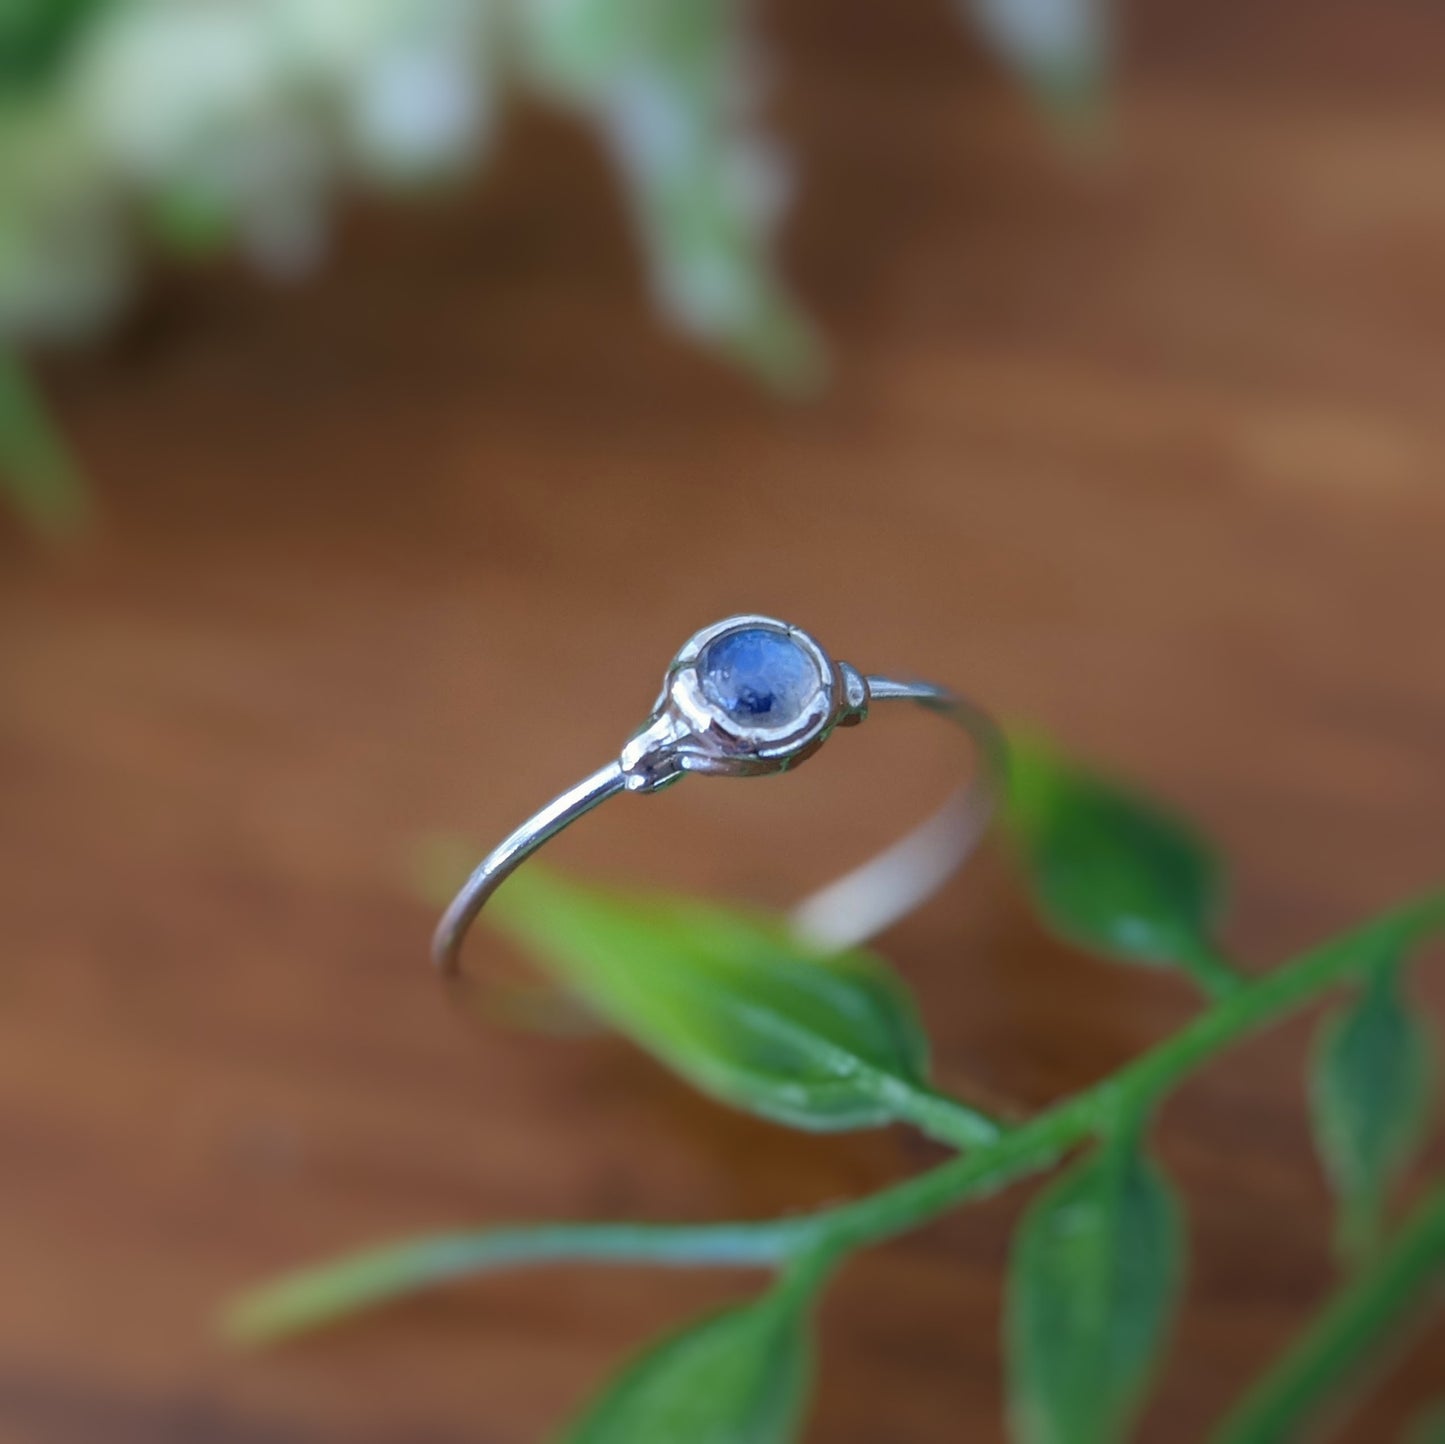 Dainty Blue Moonstone June Birthstone Stacking ring in unique Sterling Silver setting